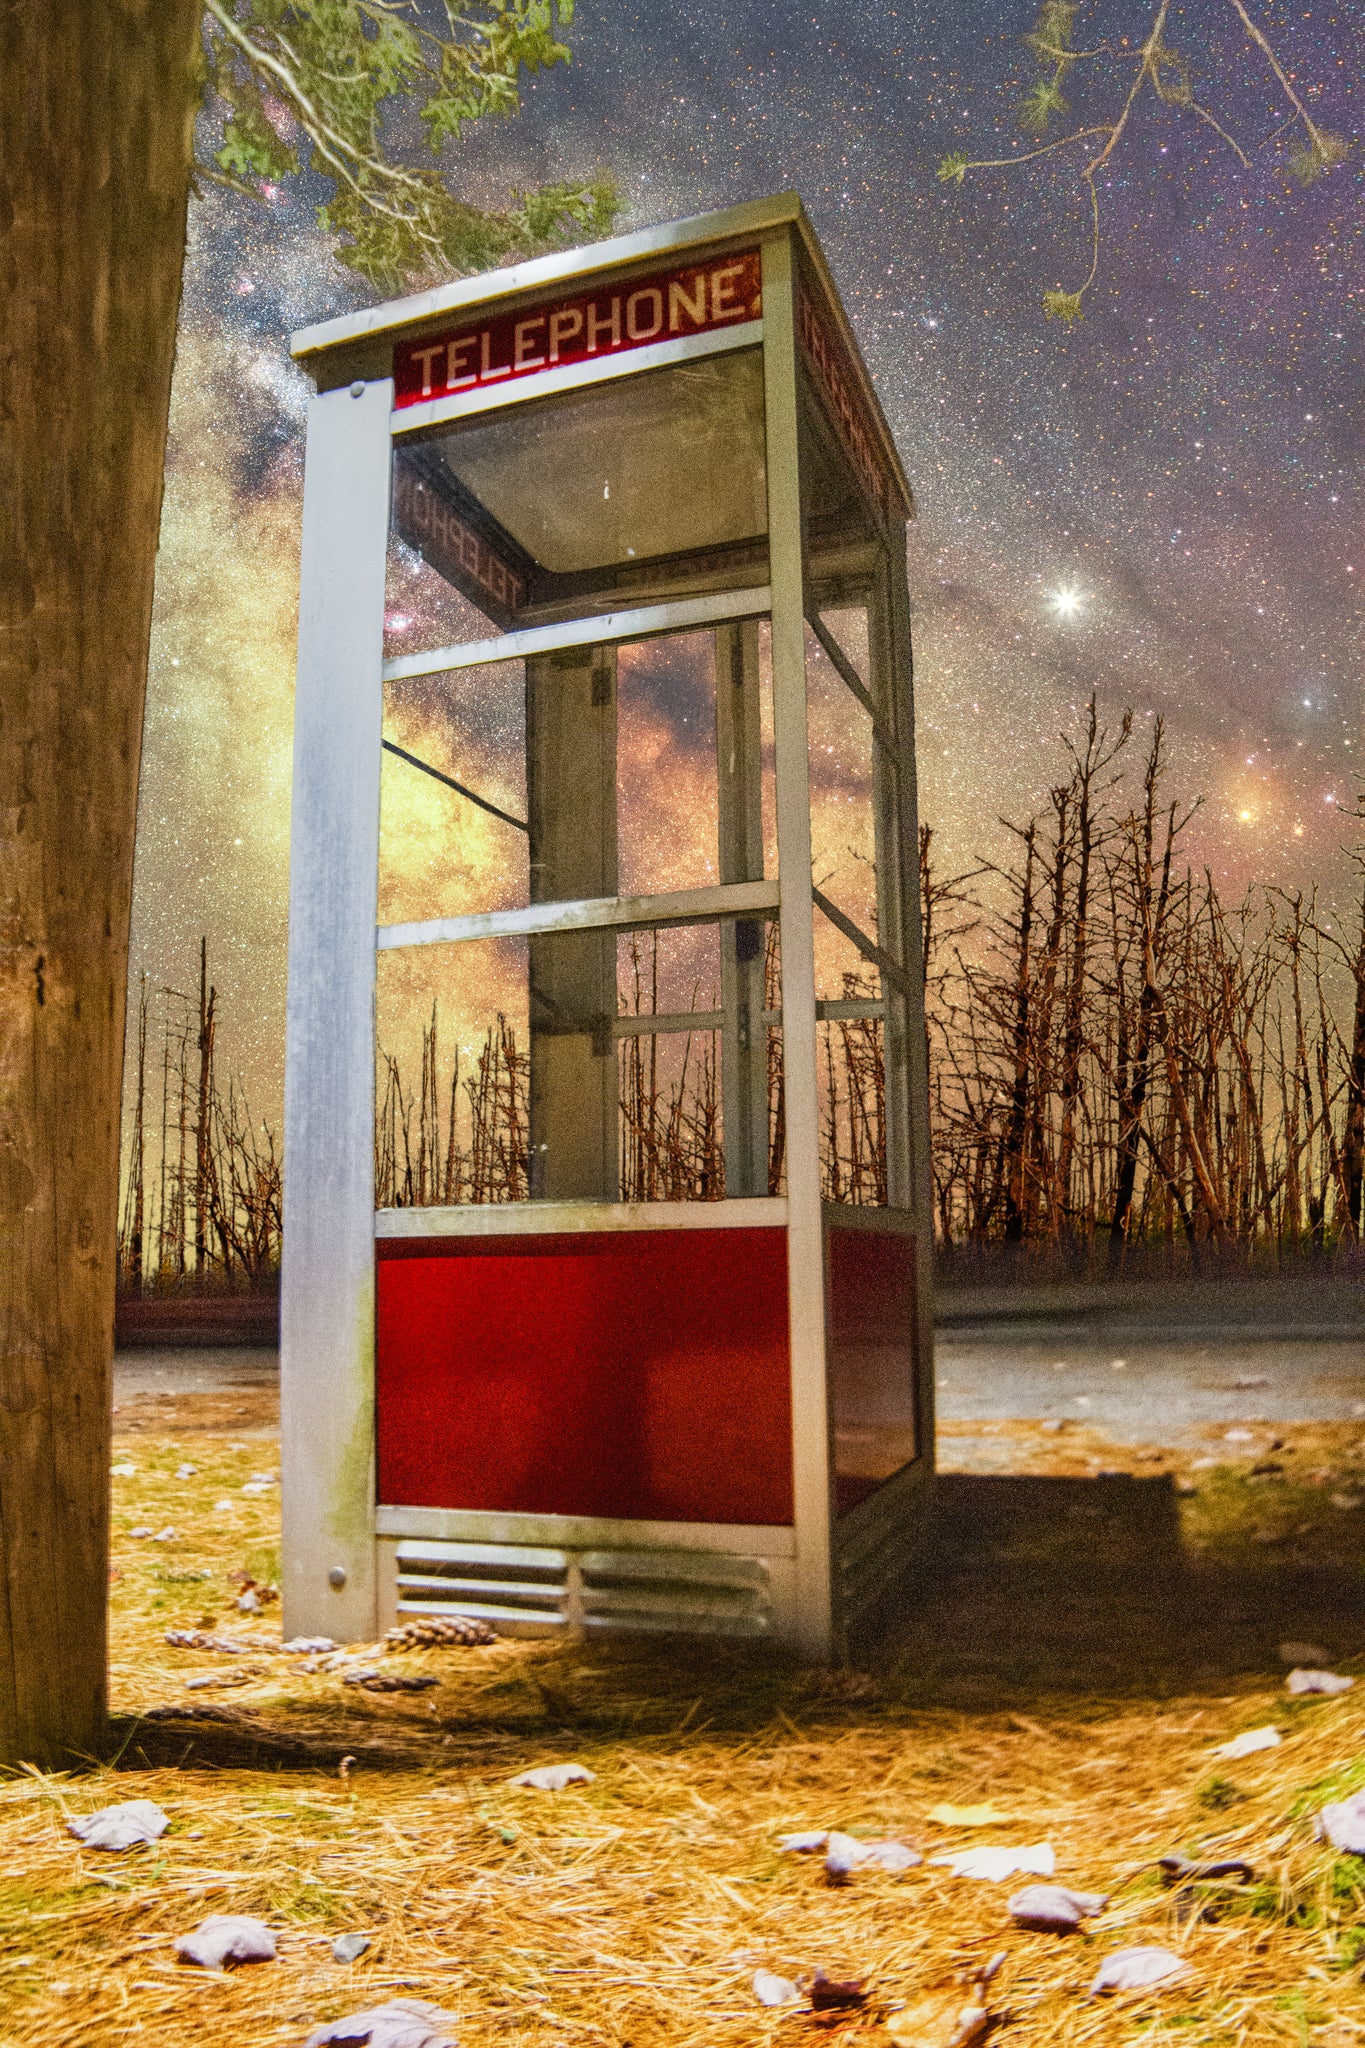 Phone Booth of Dreams